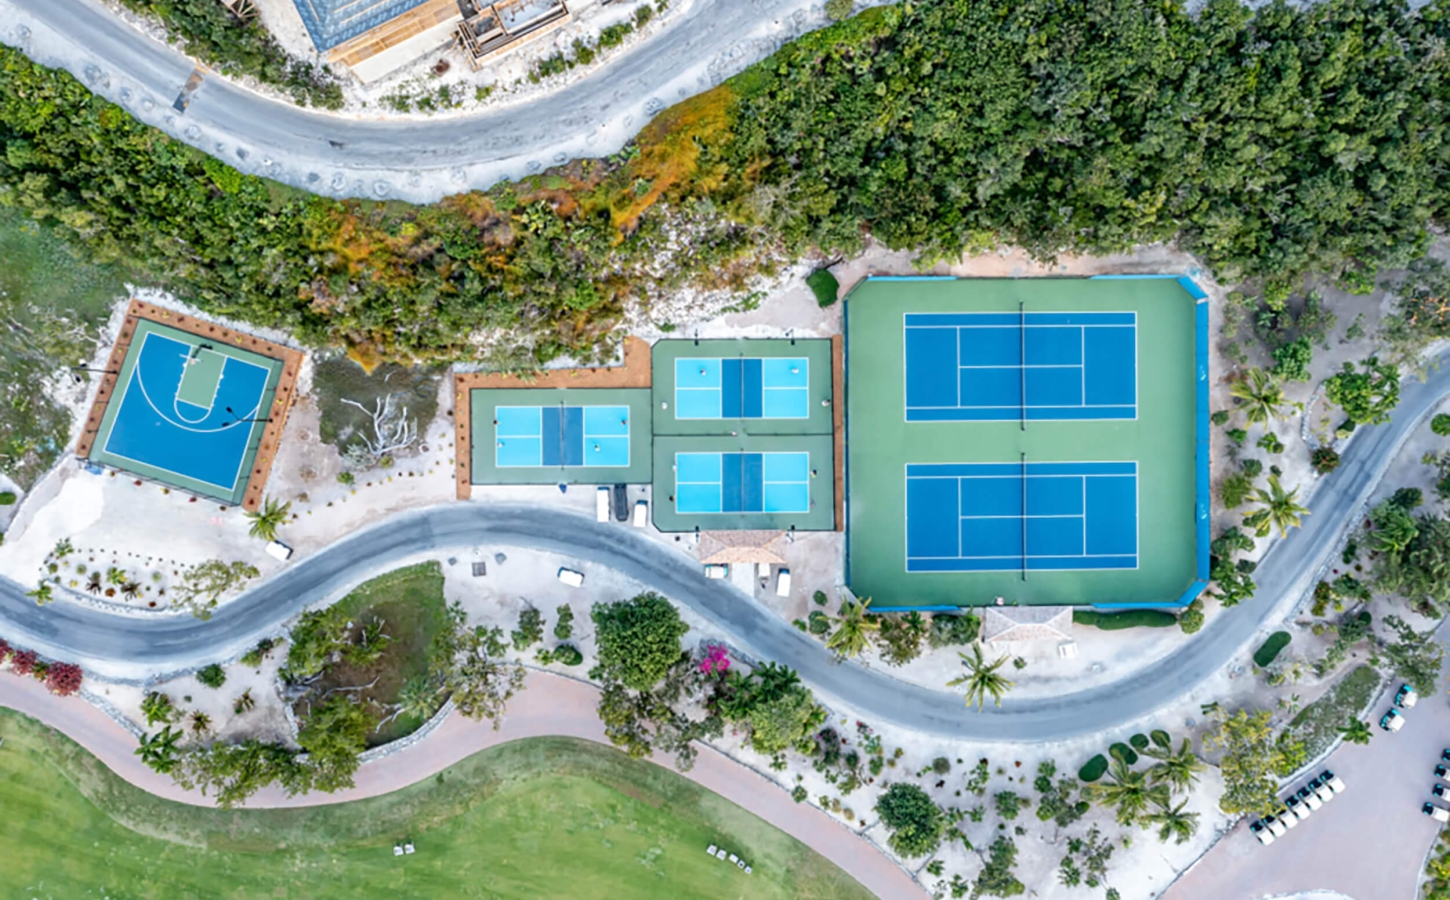 Drone shot of the pickle ball and tennis courts at The Abaco Club